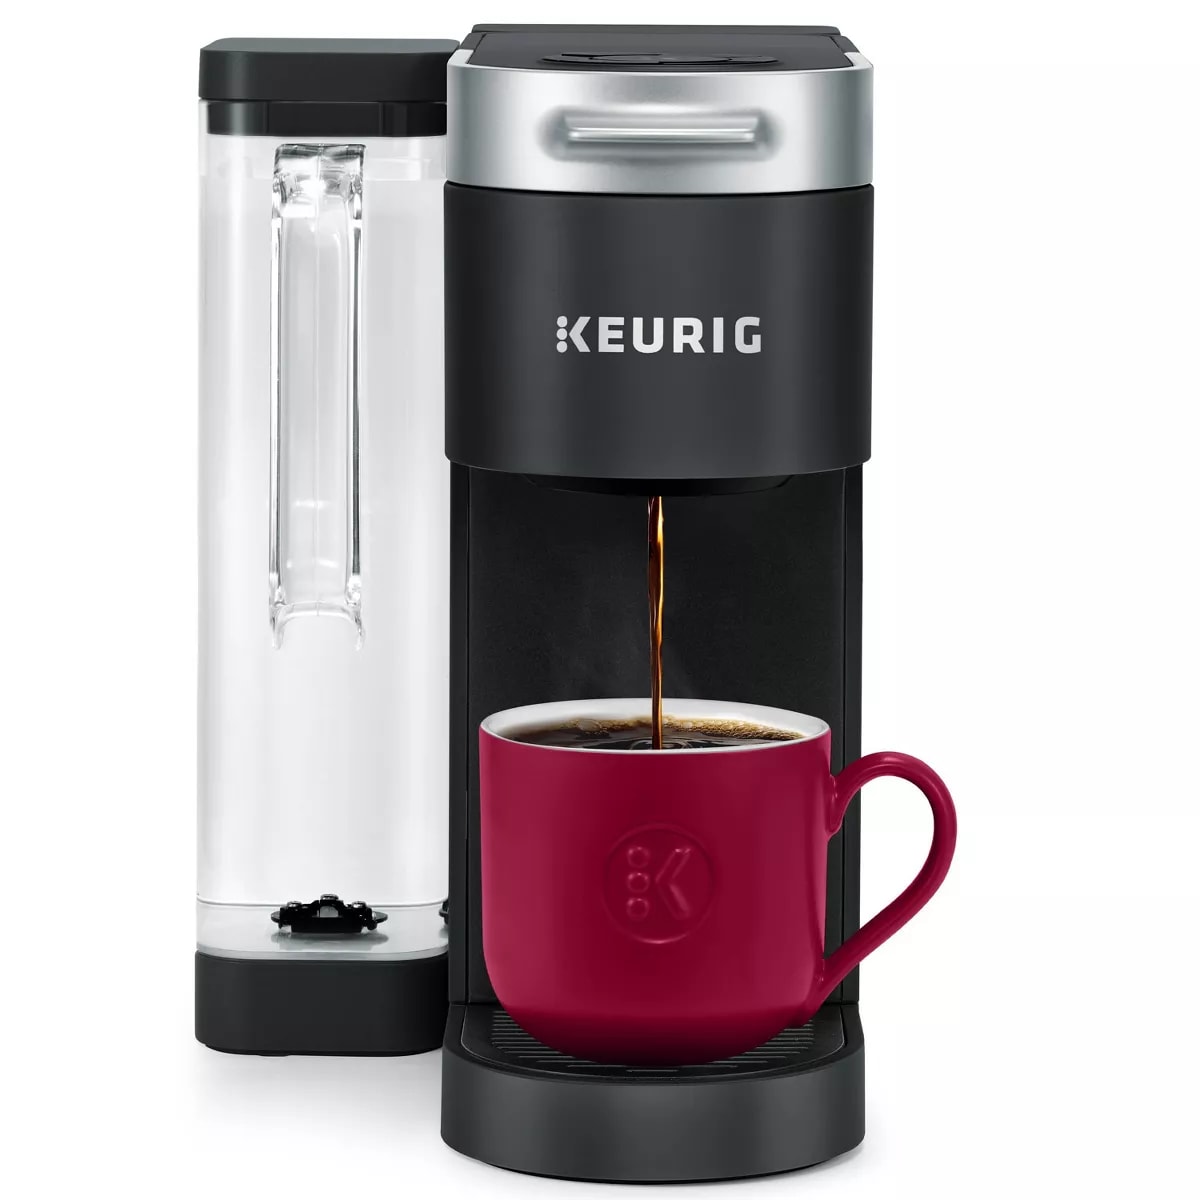 A coffee maker from famed brand Keurig.